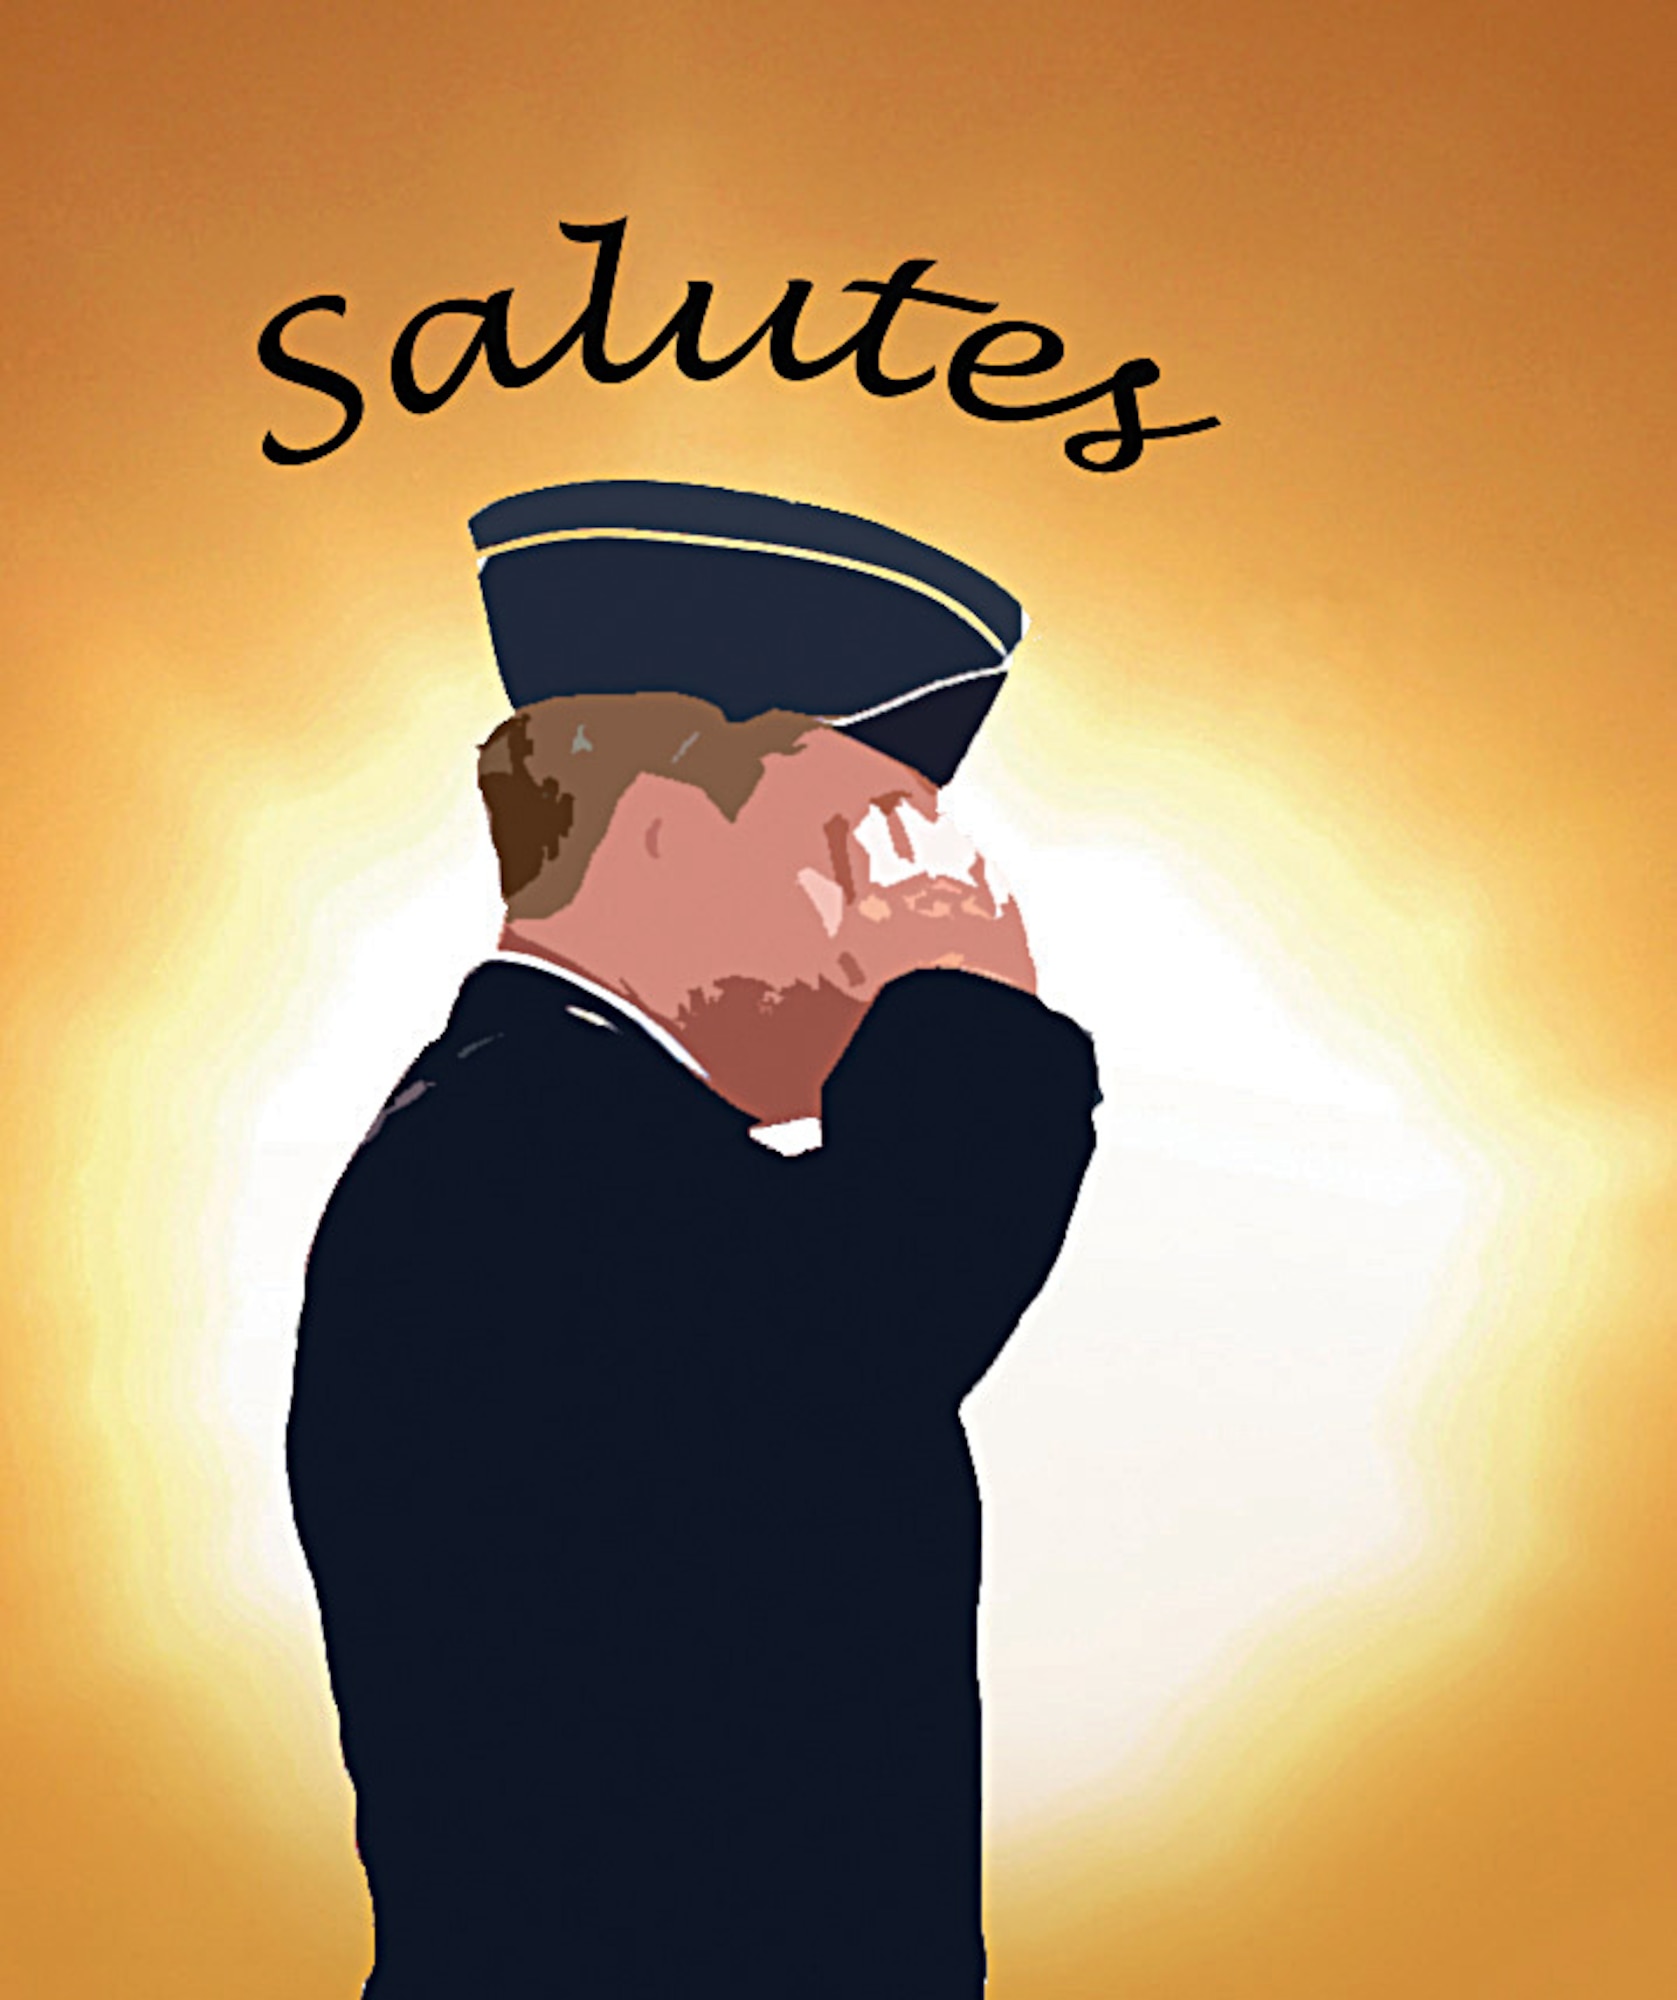 A salute to our 446th Airlift Wing Airmen who have been promoted, are new to the wing, or are retiring.